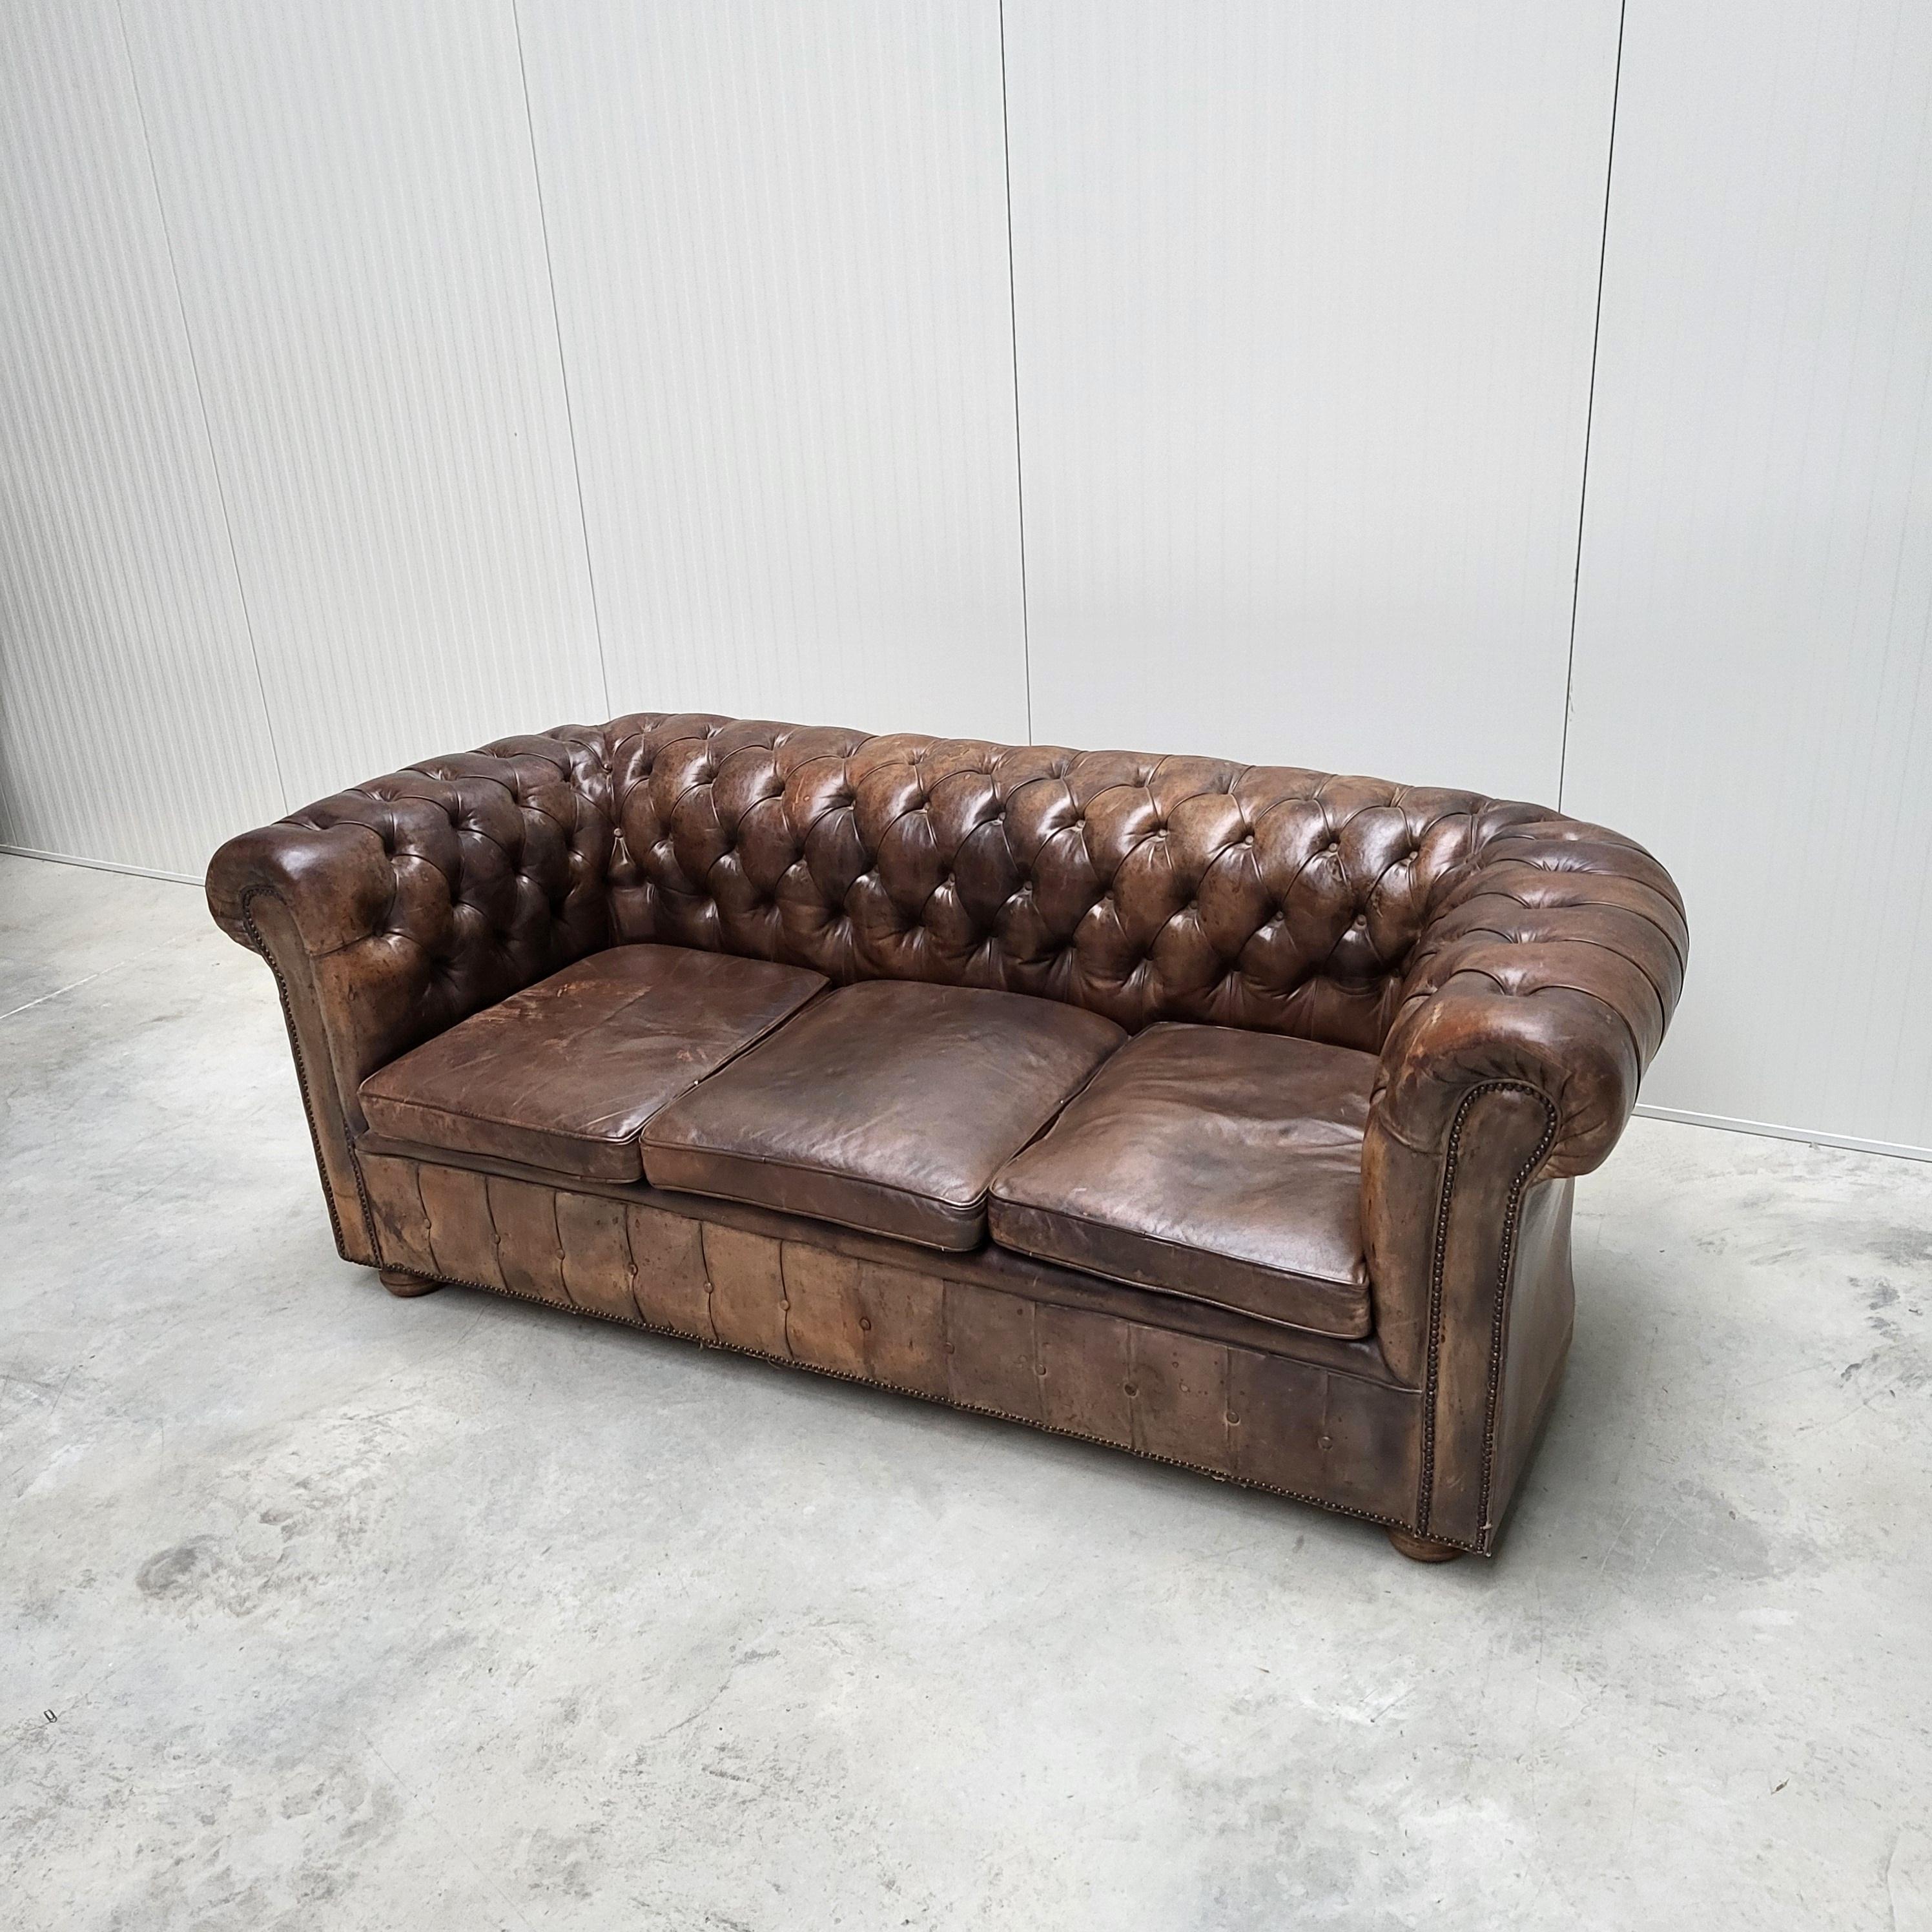 Vintage Chesterfield sofa original hand made in England with an amazing patina.
The piece comes with a very thick hand dyed leather! All buttoms and leather parts were made
by hand.

A hand crafted masterpiece!

The sofa is overall in a very good